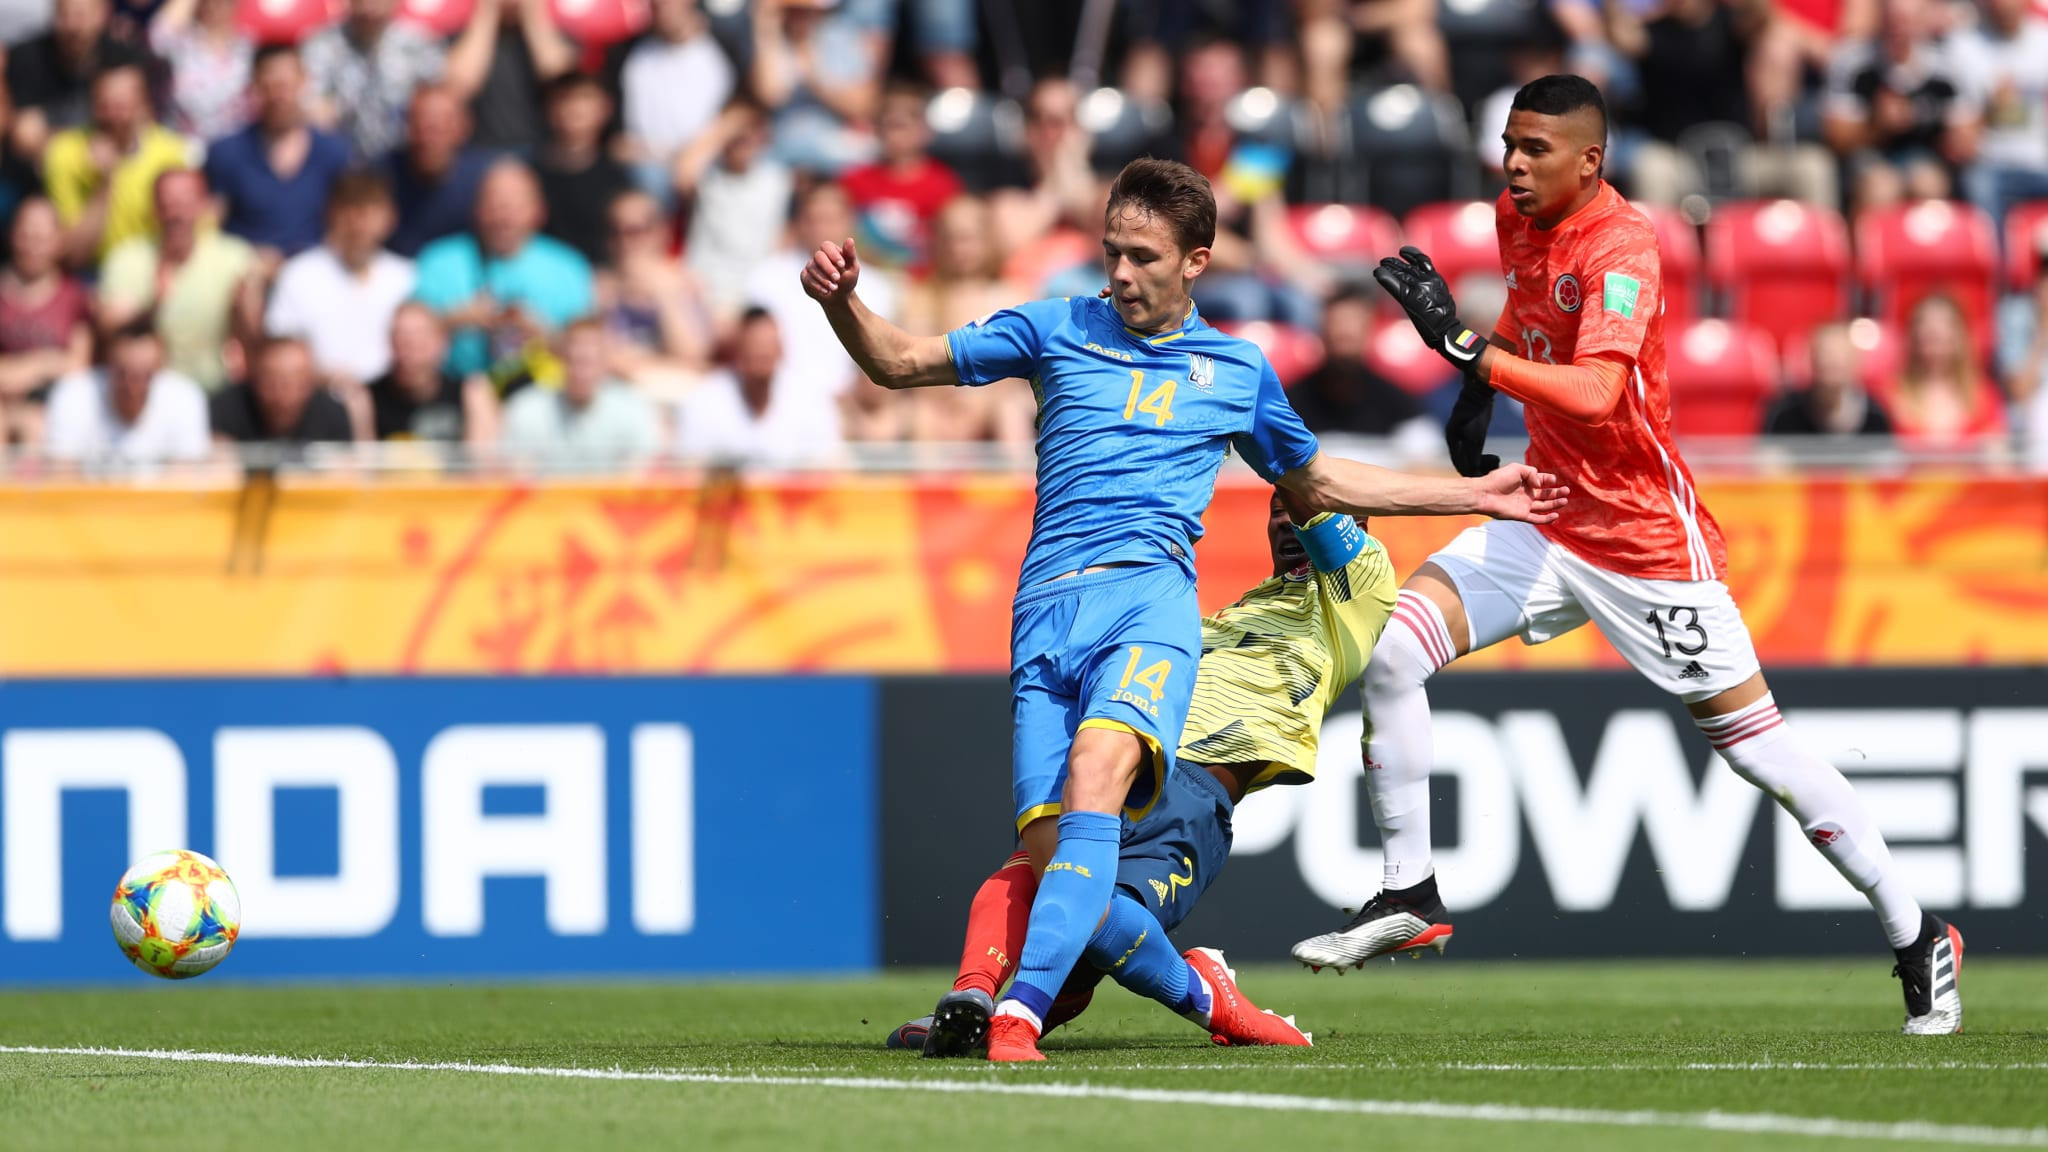 Italy win six-goal thriller in Under-20 World Cup after Colombia clanger hands Ukraine place in the semi-finals